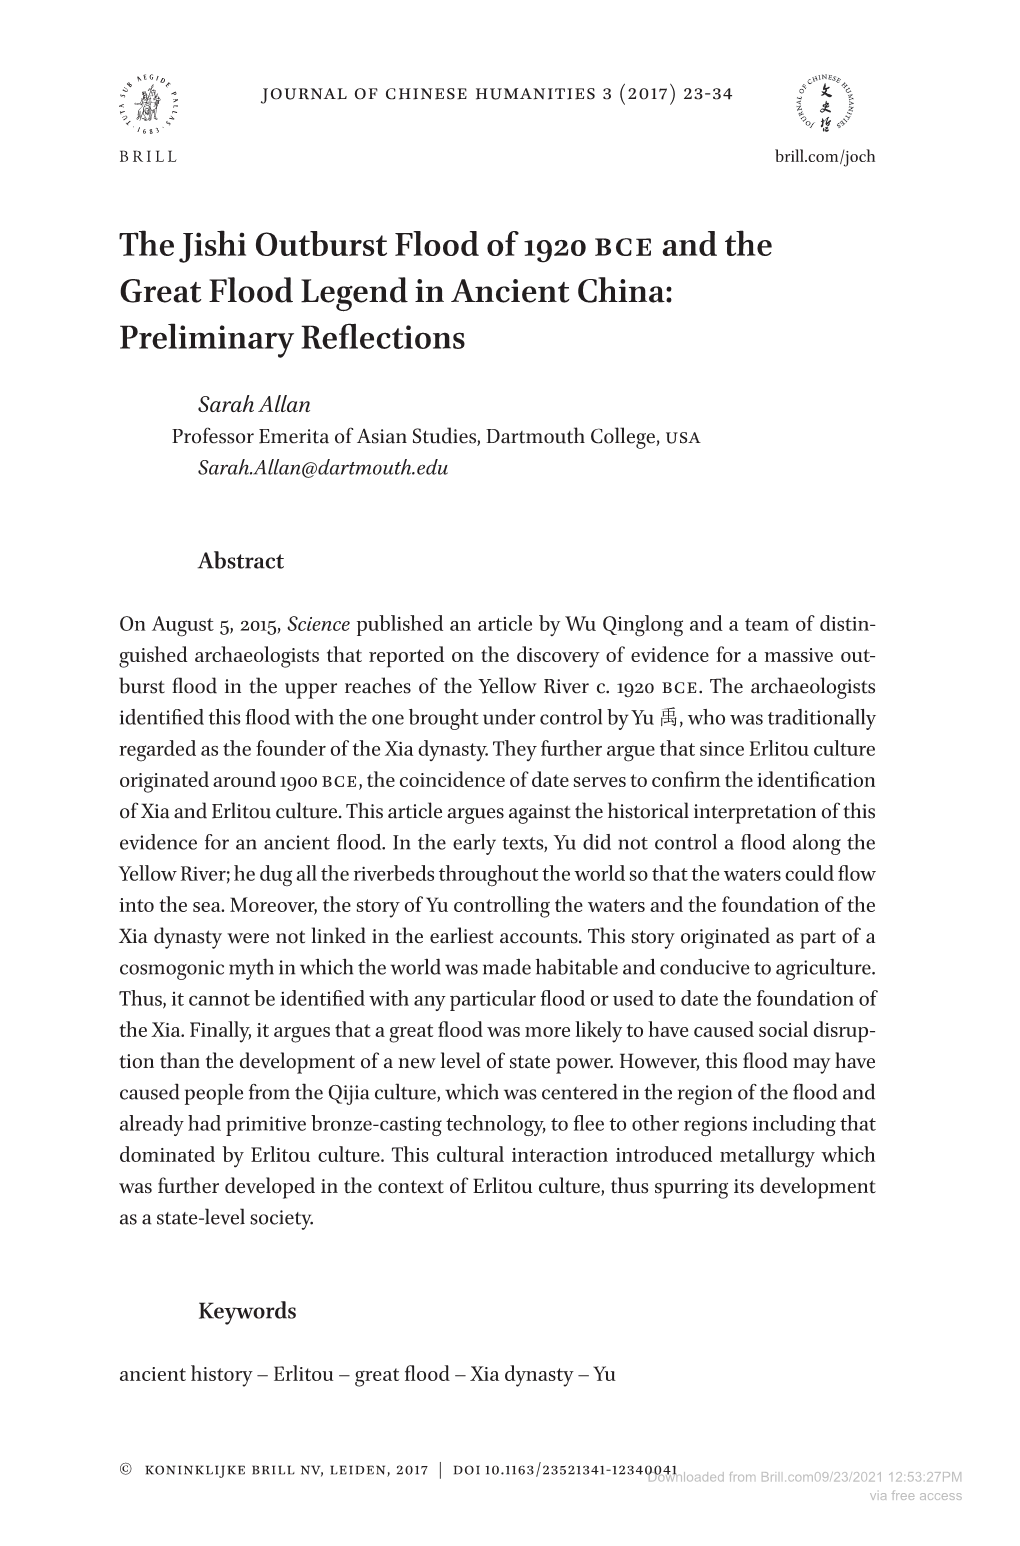 The Jishi Outburst Flood of 1920 BCE and the Great Flood Legend in Ancient China: Preliminary Reflections